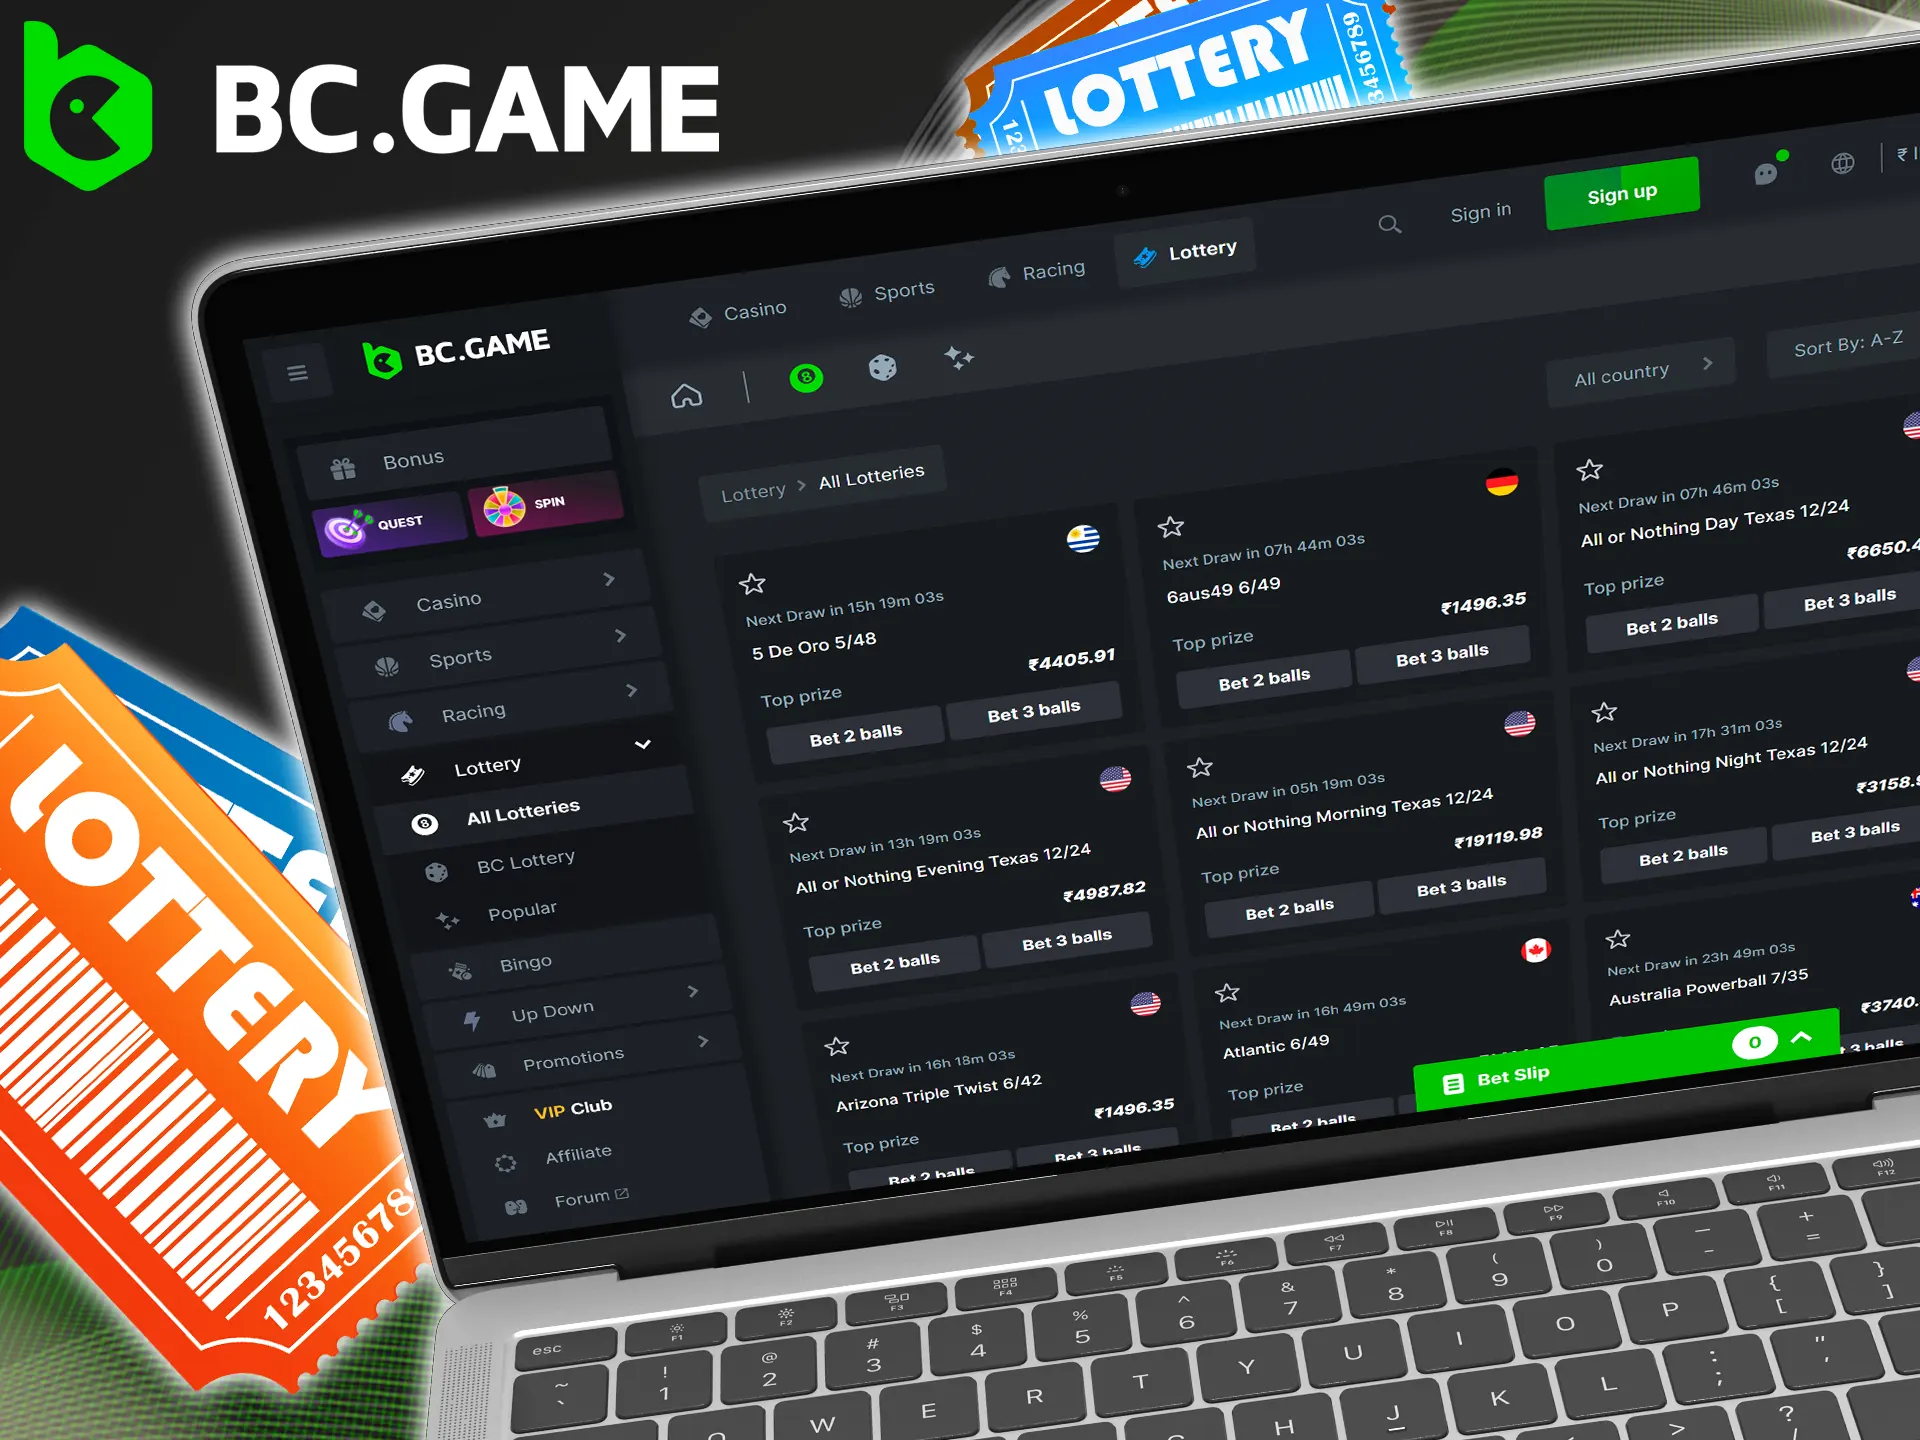 Start your journey through the world of BC Game online lotteries.